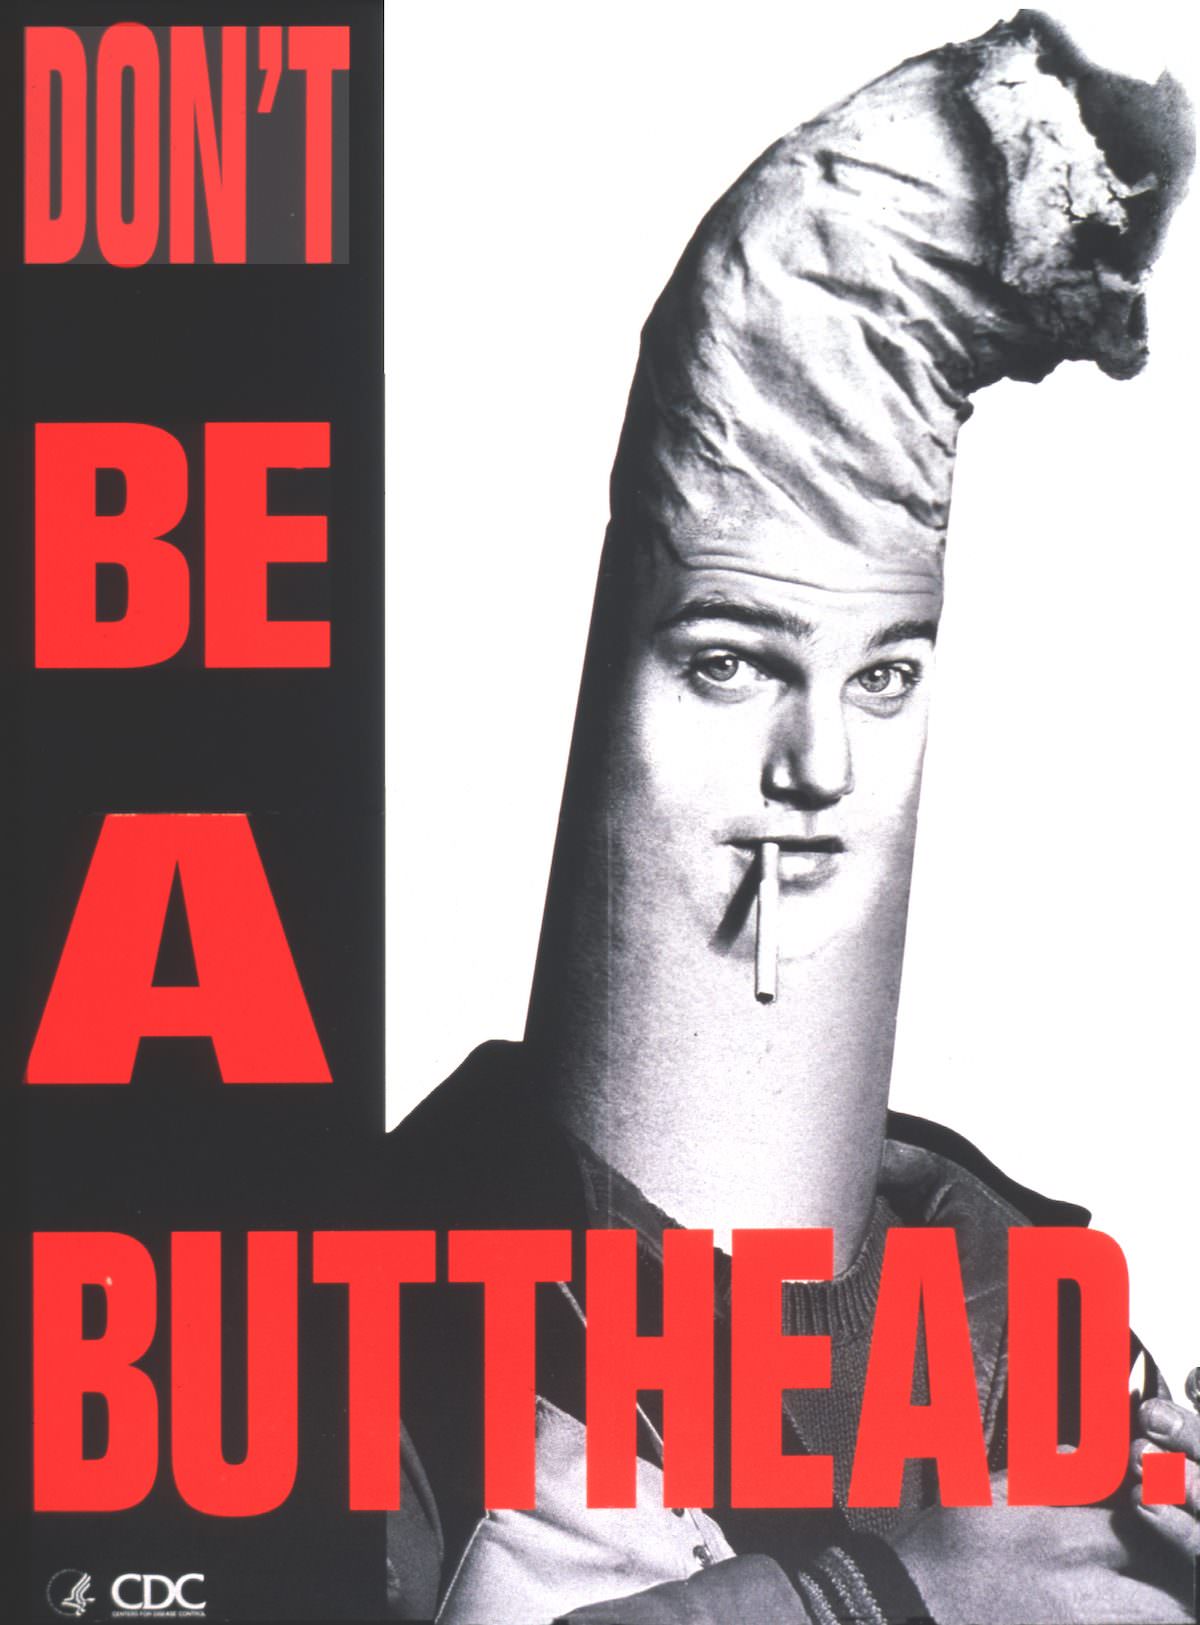 Don’t be a butthead Contributor(s)- Centers for Disease Control (U.S.) 1994